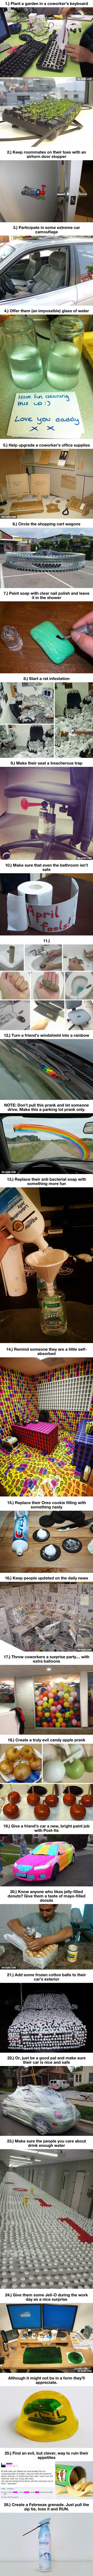 The 26 Most Brilliant Pranks Ever To Pull On Your Friends